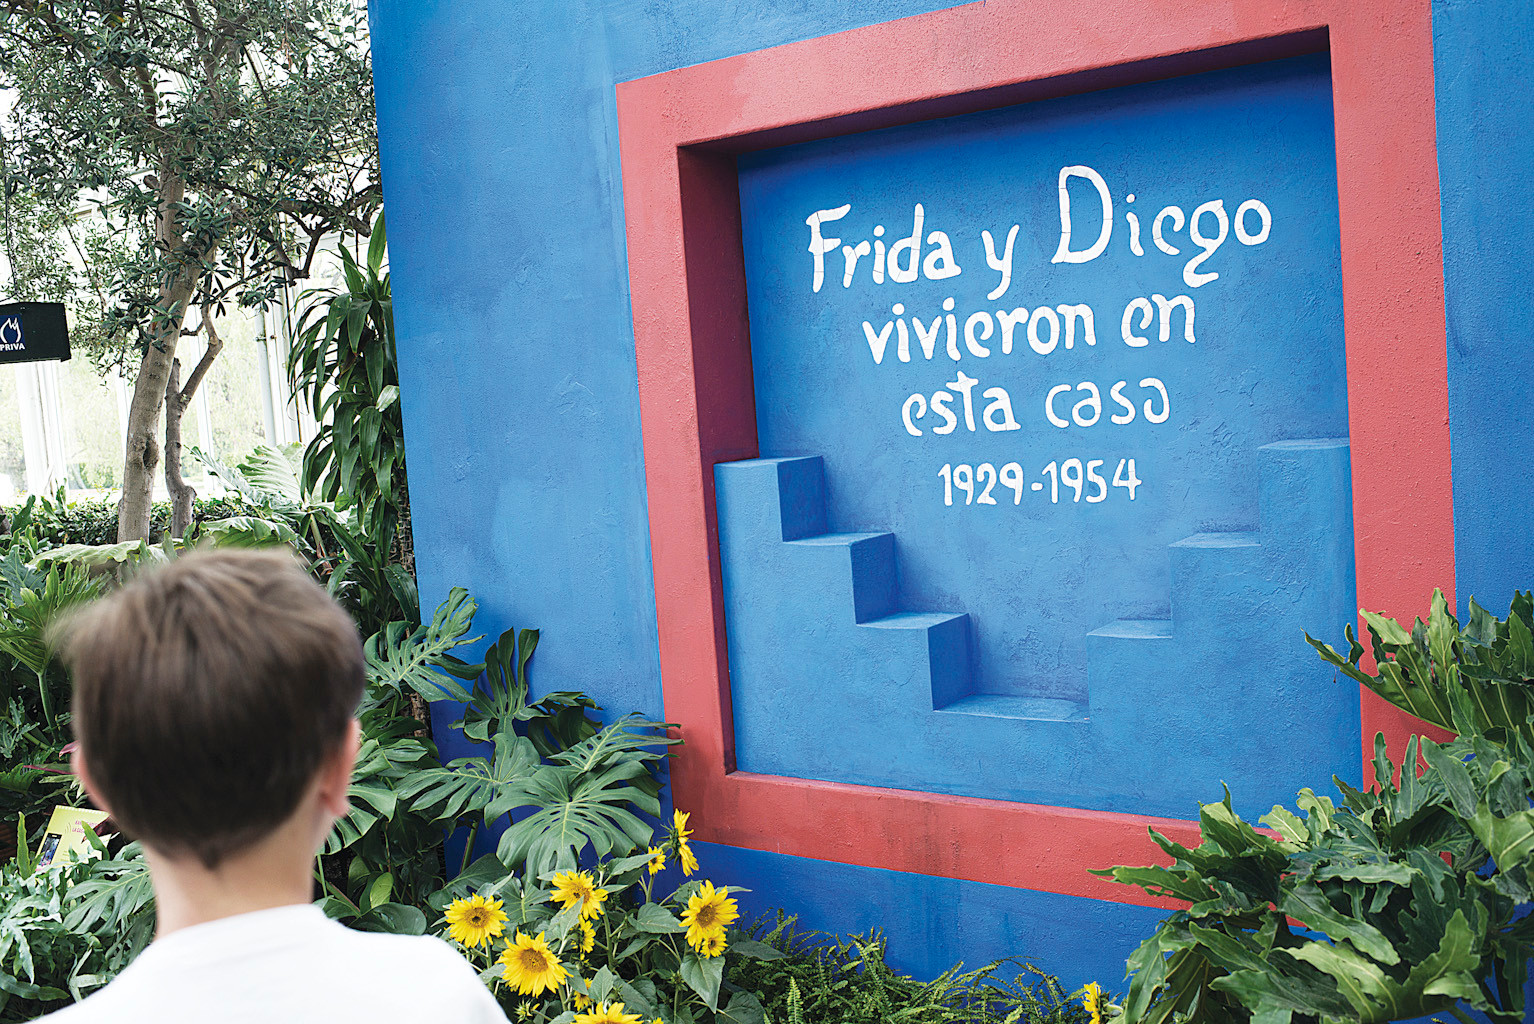 The home of Frida Kahlo and her husband Diego Rivera in Mexico City was known as 'Casa Azul.'